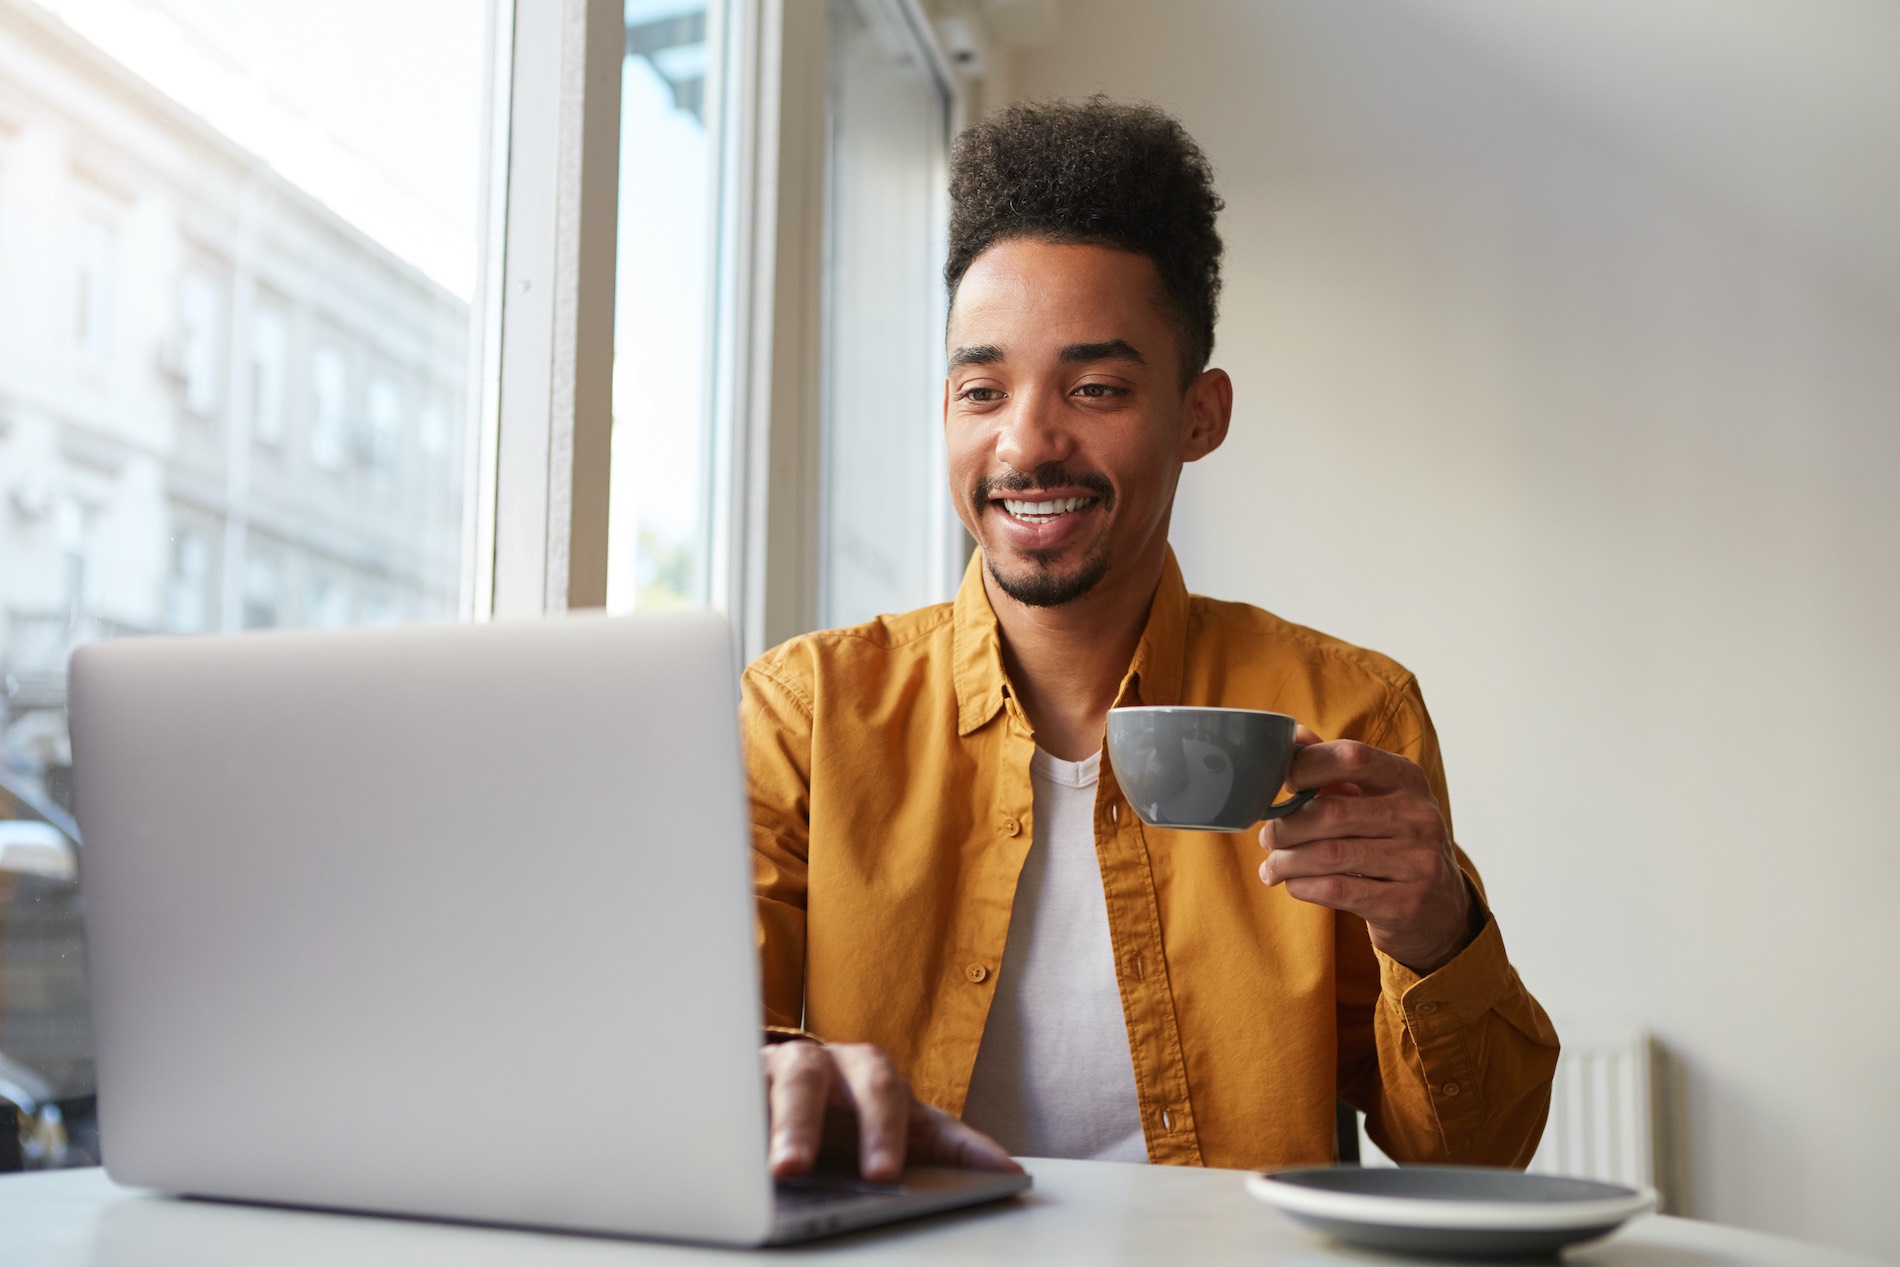 Black Man On His Laptop Reading An Article About How To Build A Wordpress Site From Scratch And Holding A Cup Of Coffee